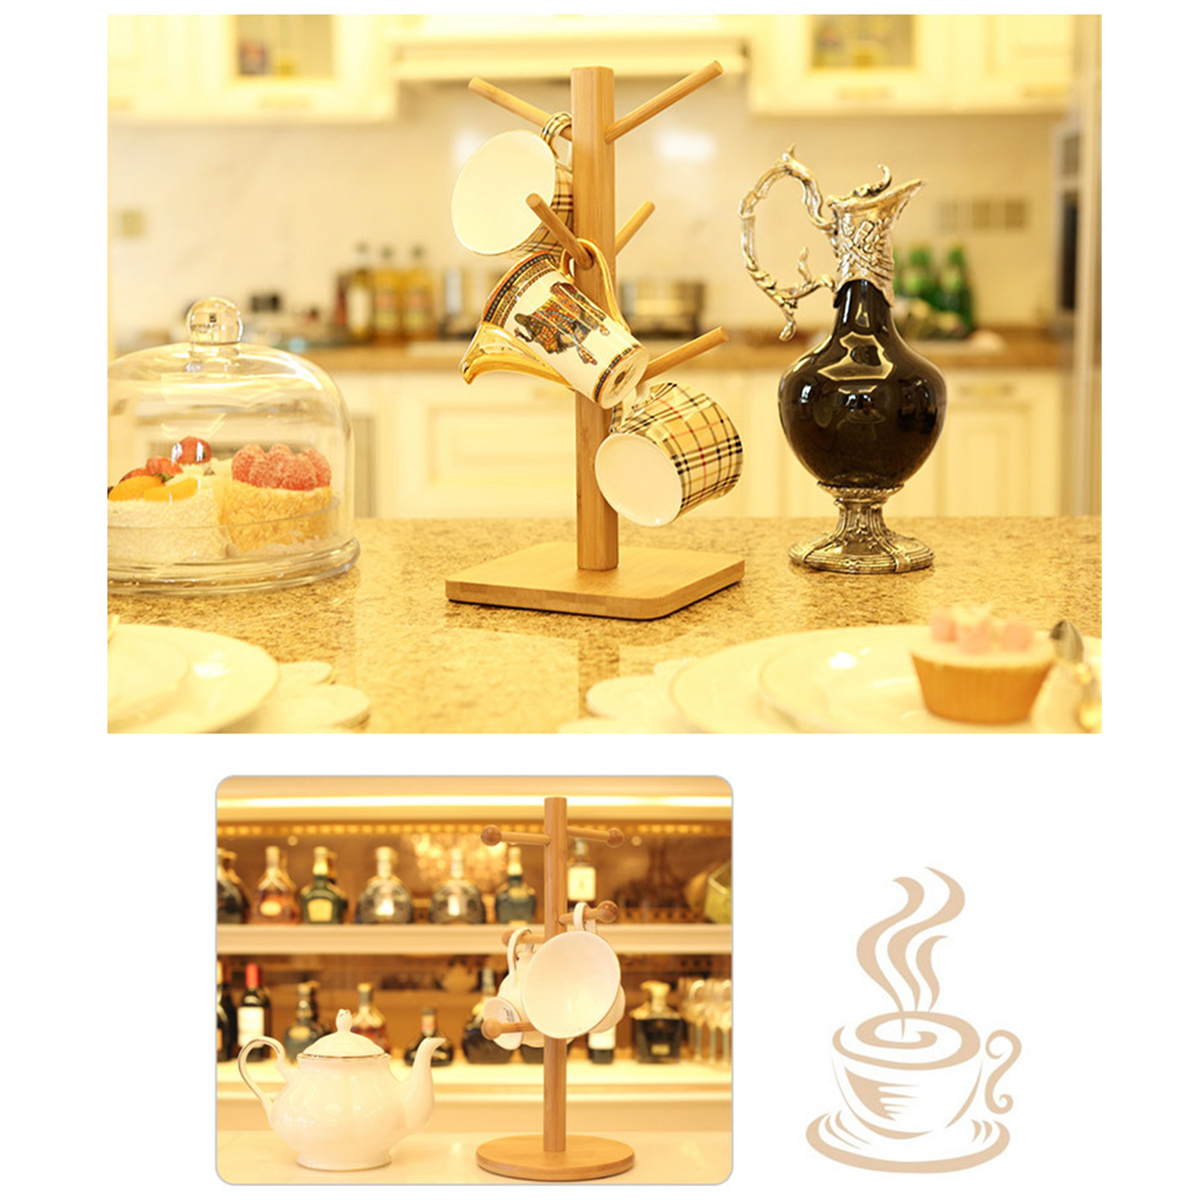 Wooden-Cup-Holder-Teacup-Mug-Drain-Rack-Stand-6-Cups-Drain-Cup-Hanging-Stand-Coffee-Cup-Display-Stan-1777089-6